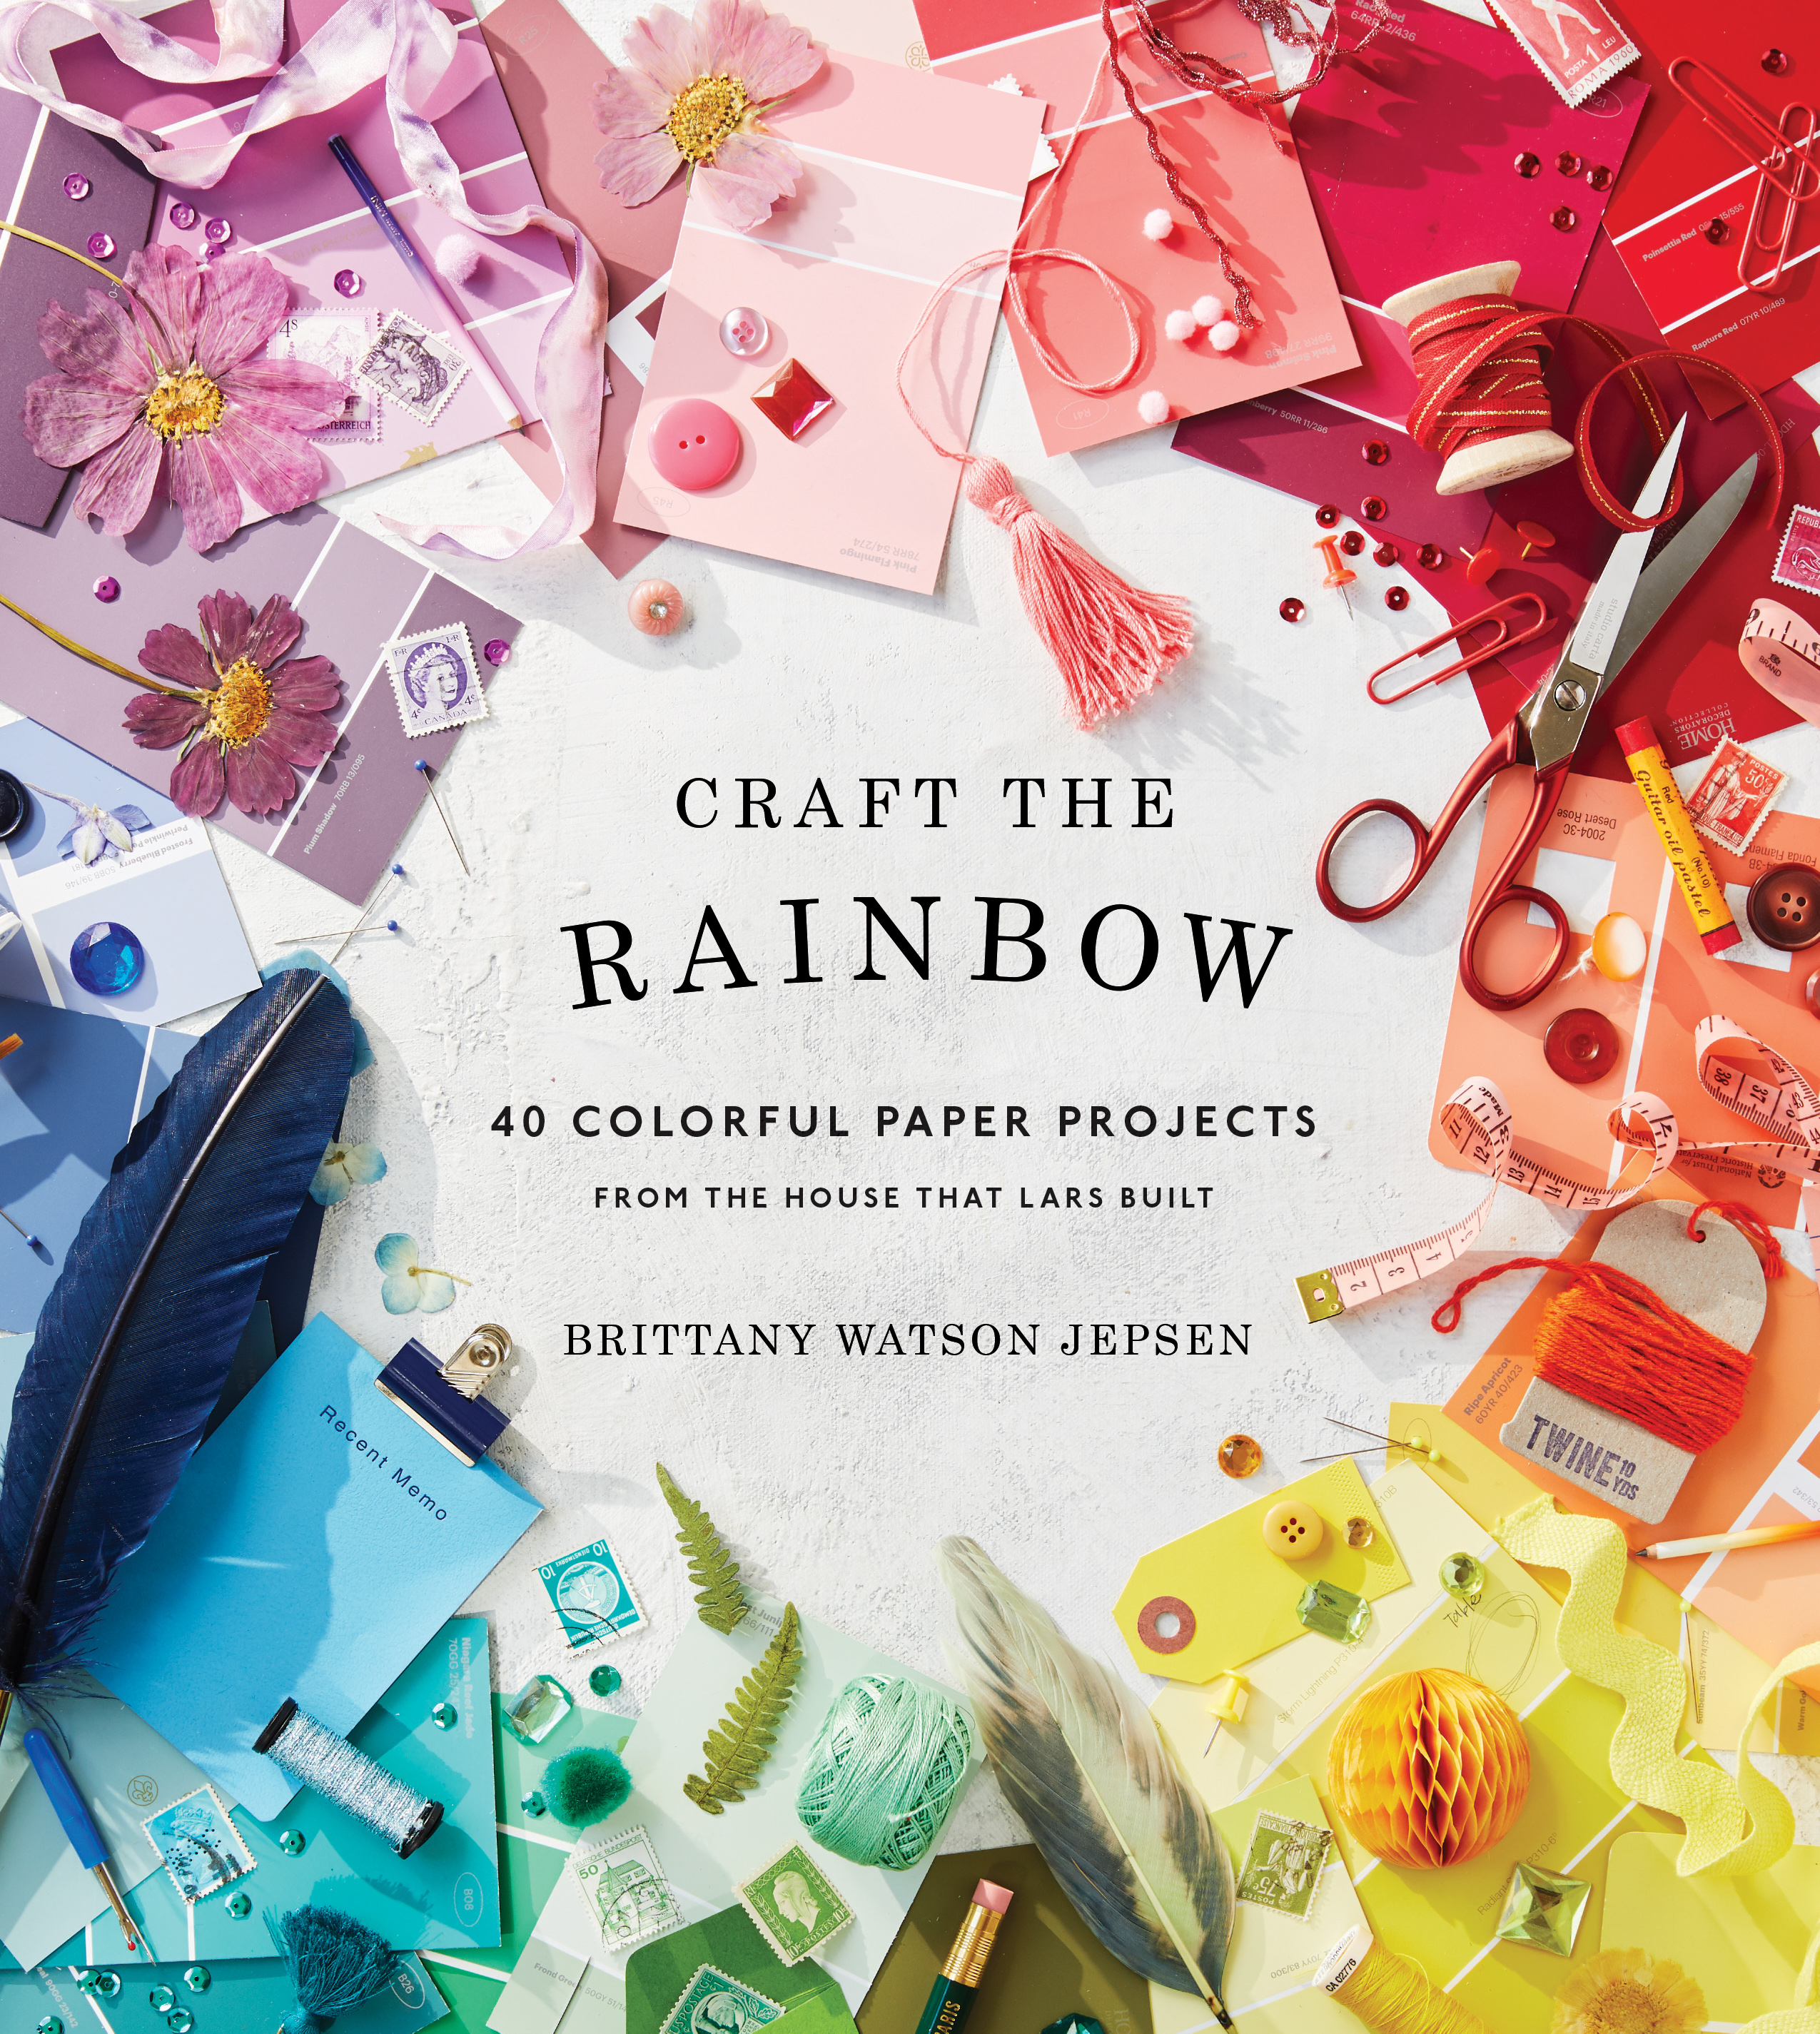 Craft the Rainbow book by Brittany Jepsen